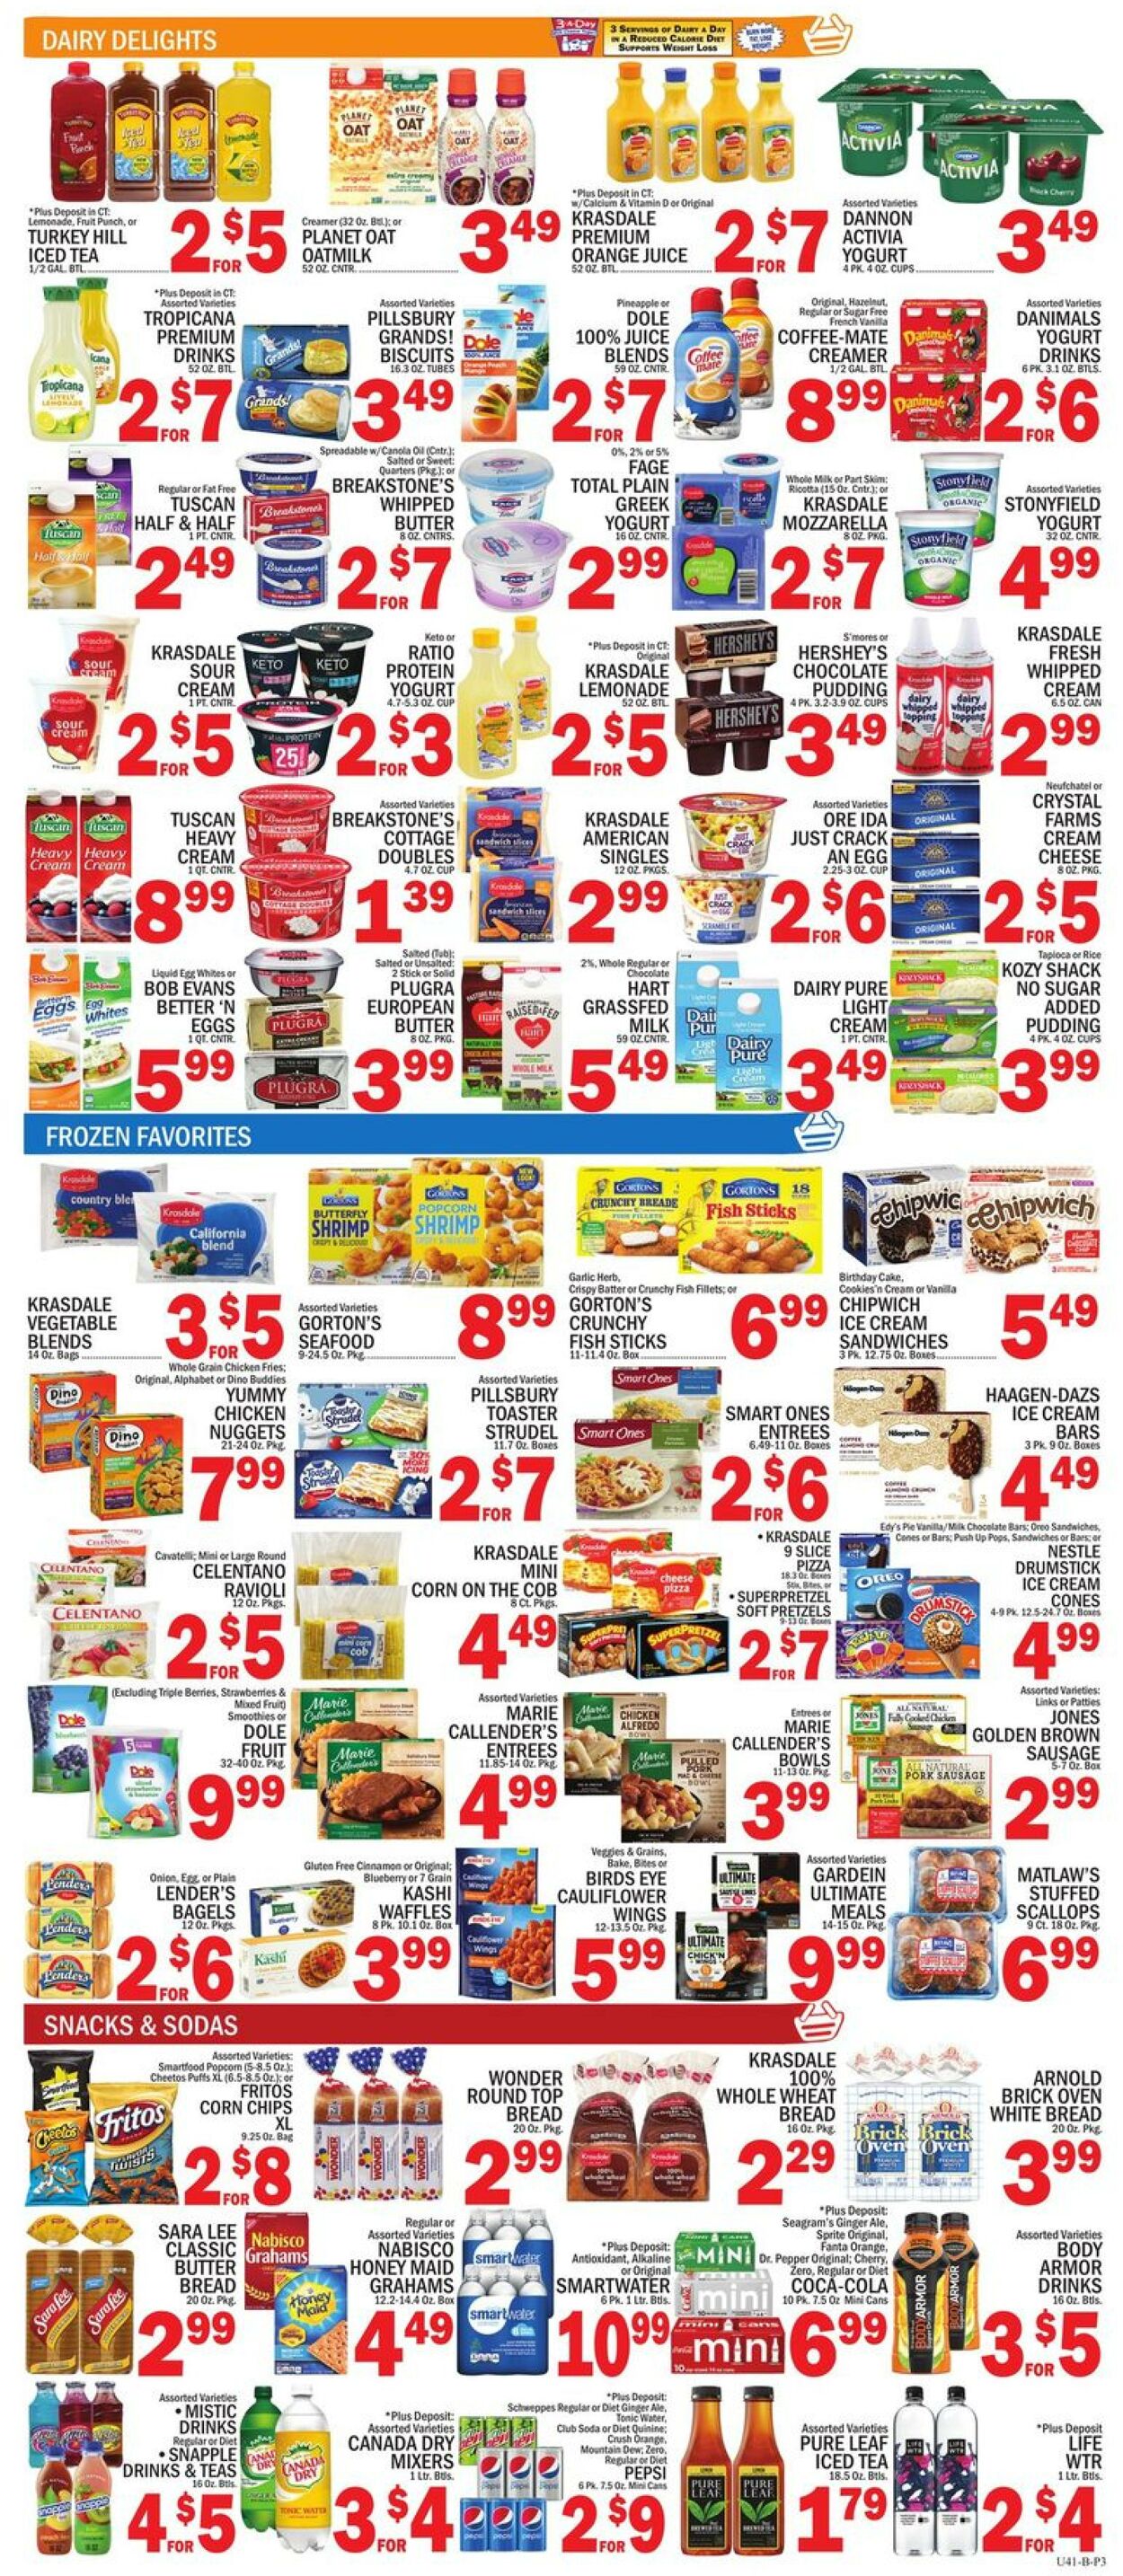 Weekly ad CTown 02/24/2023 - 03/02/2023